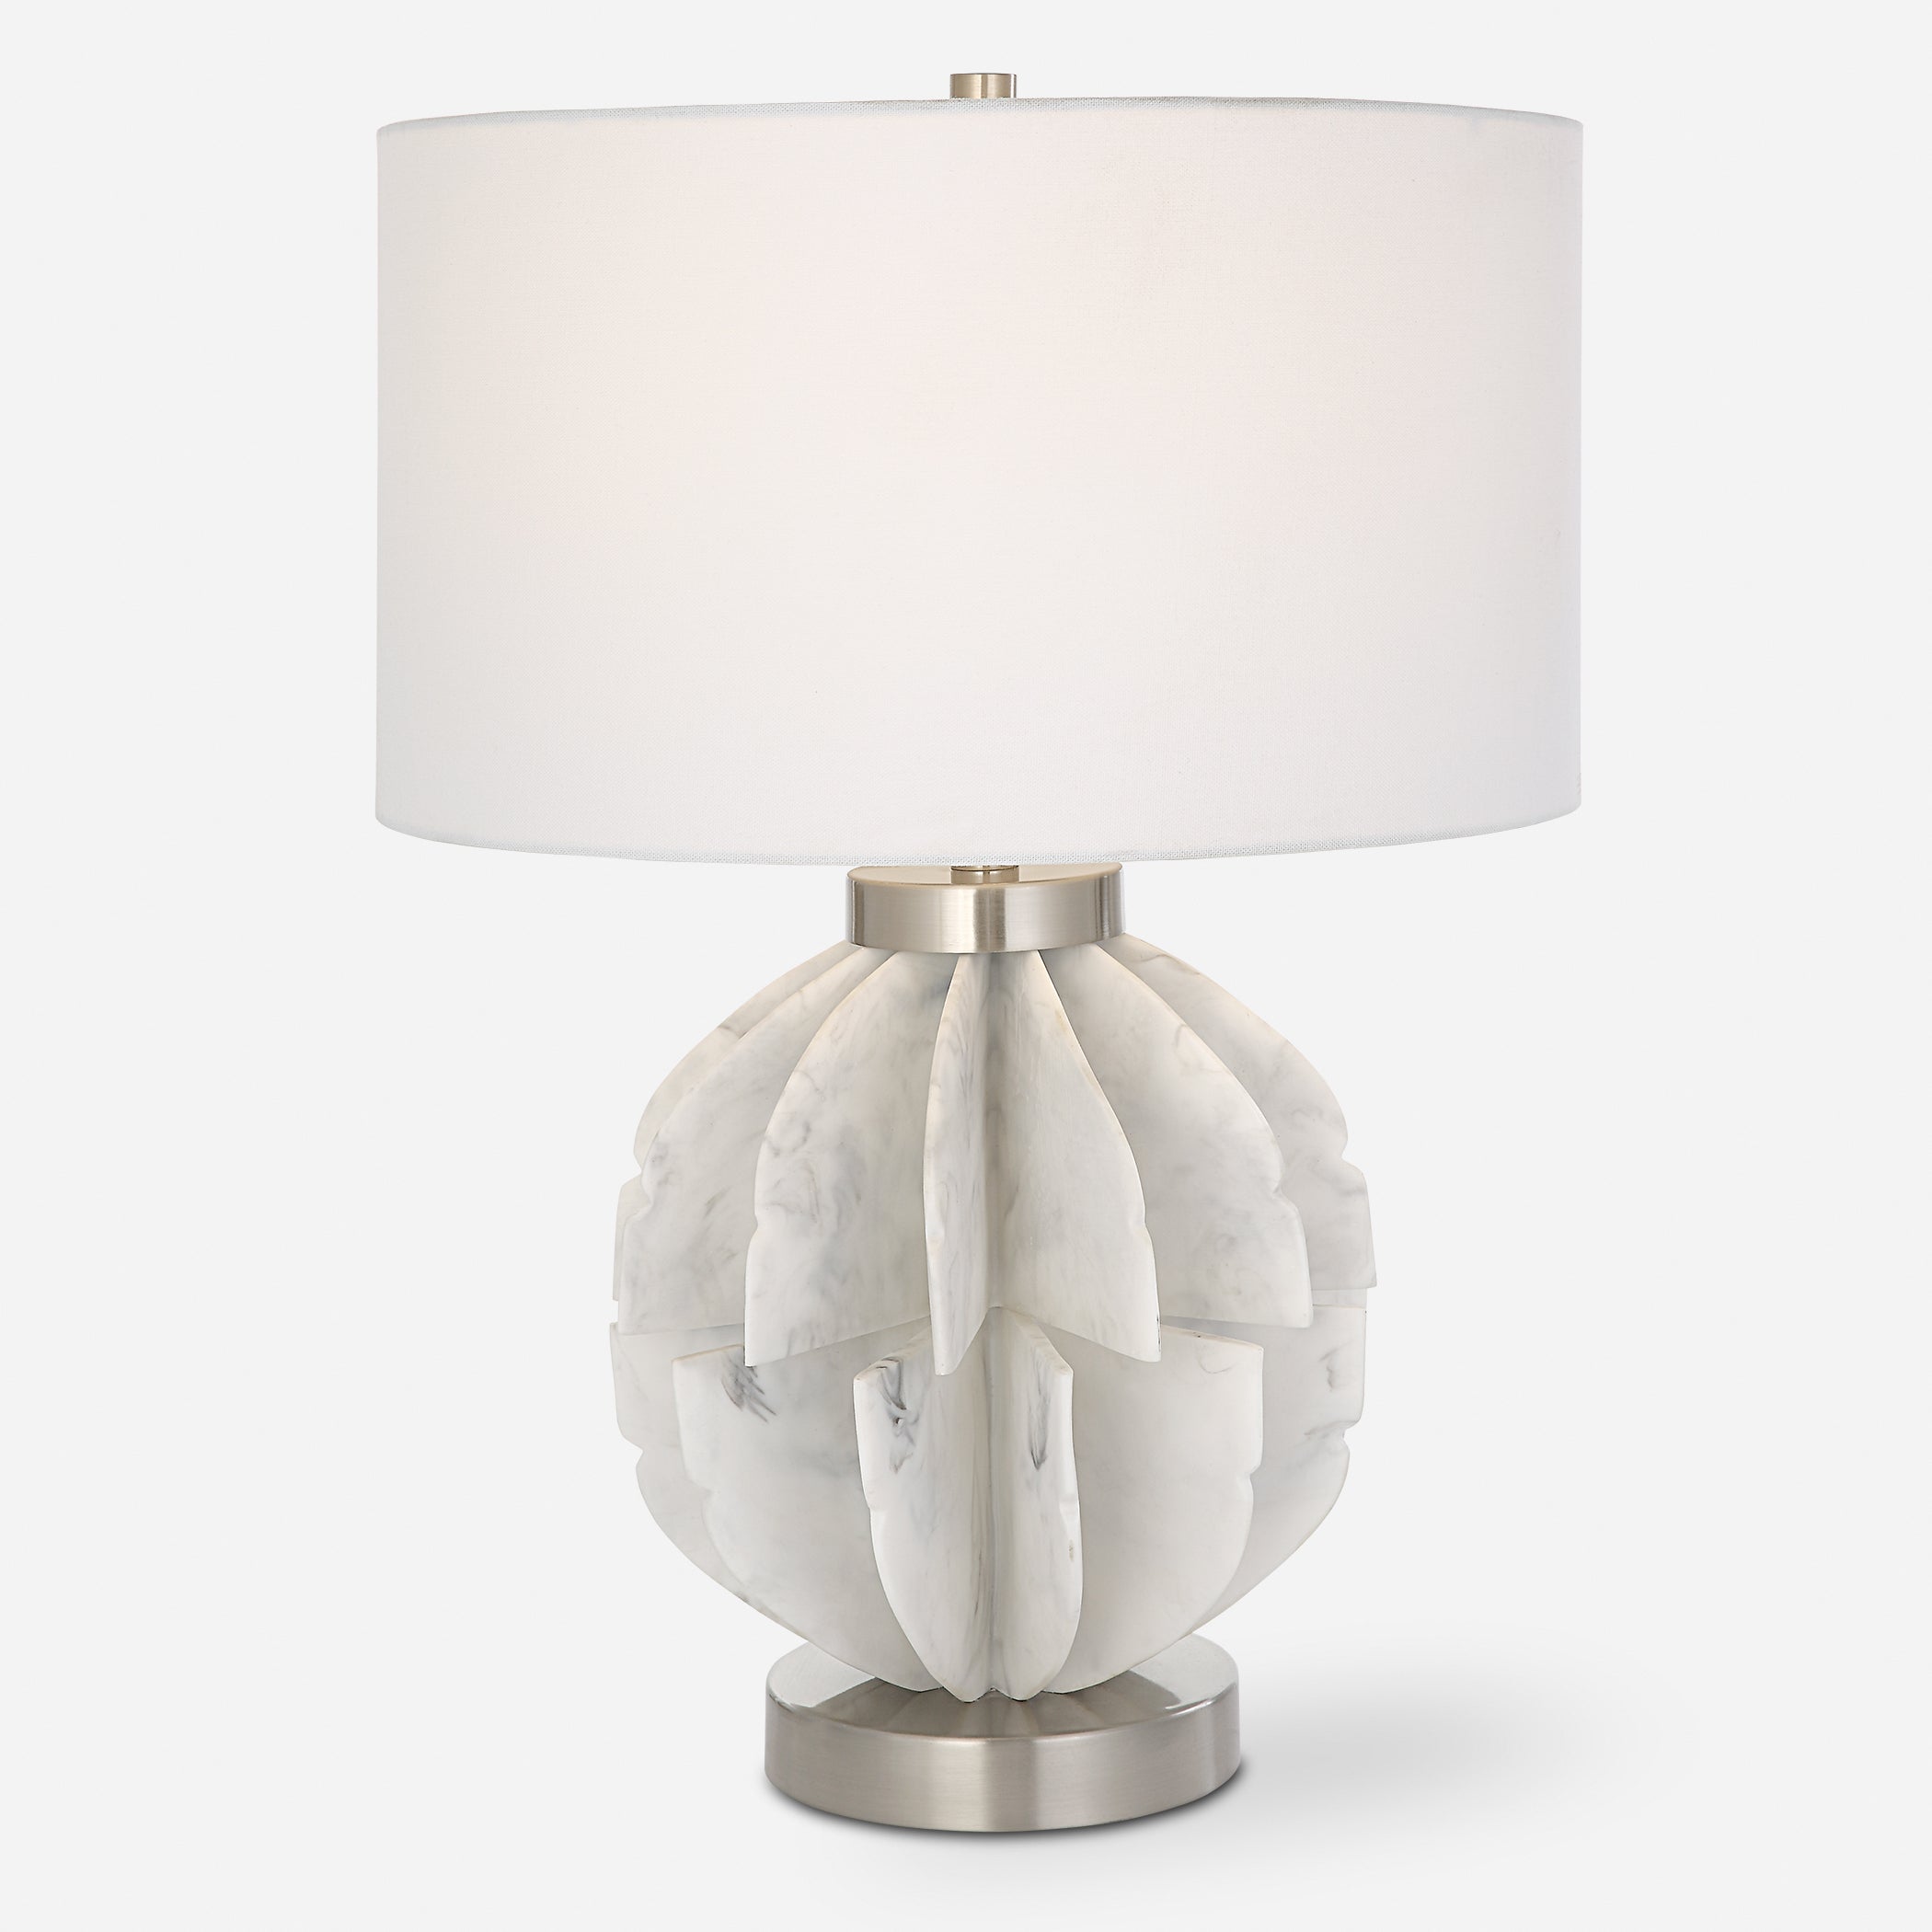 Uttermost Repetition White Marble Table Lamp White Marble Table Lamp Uttermost   